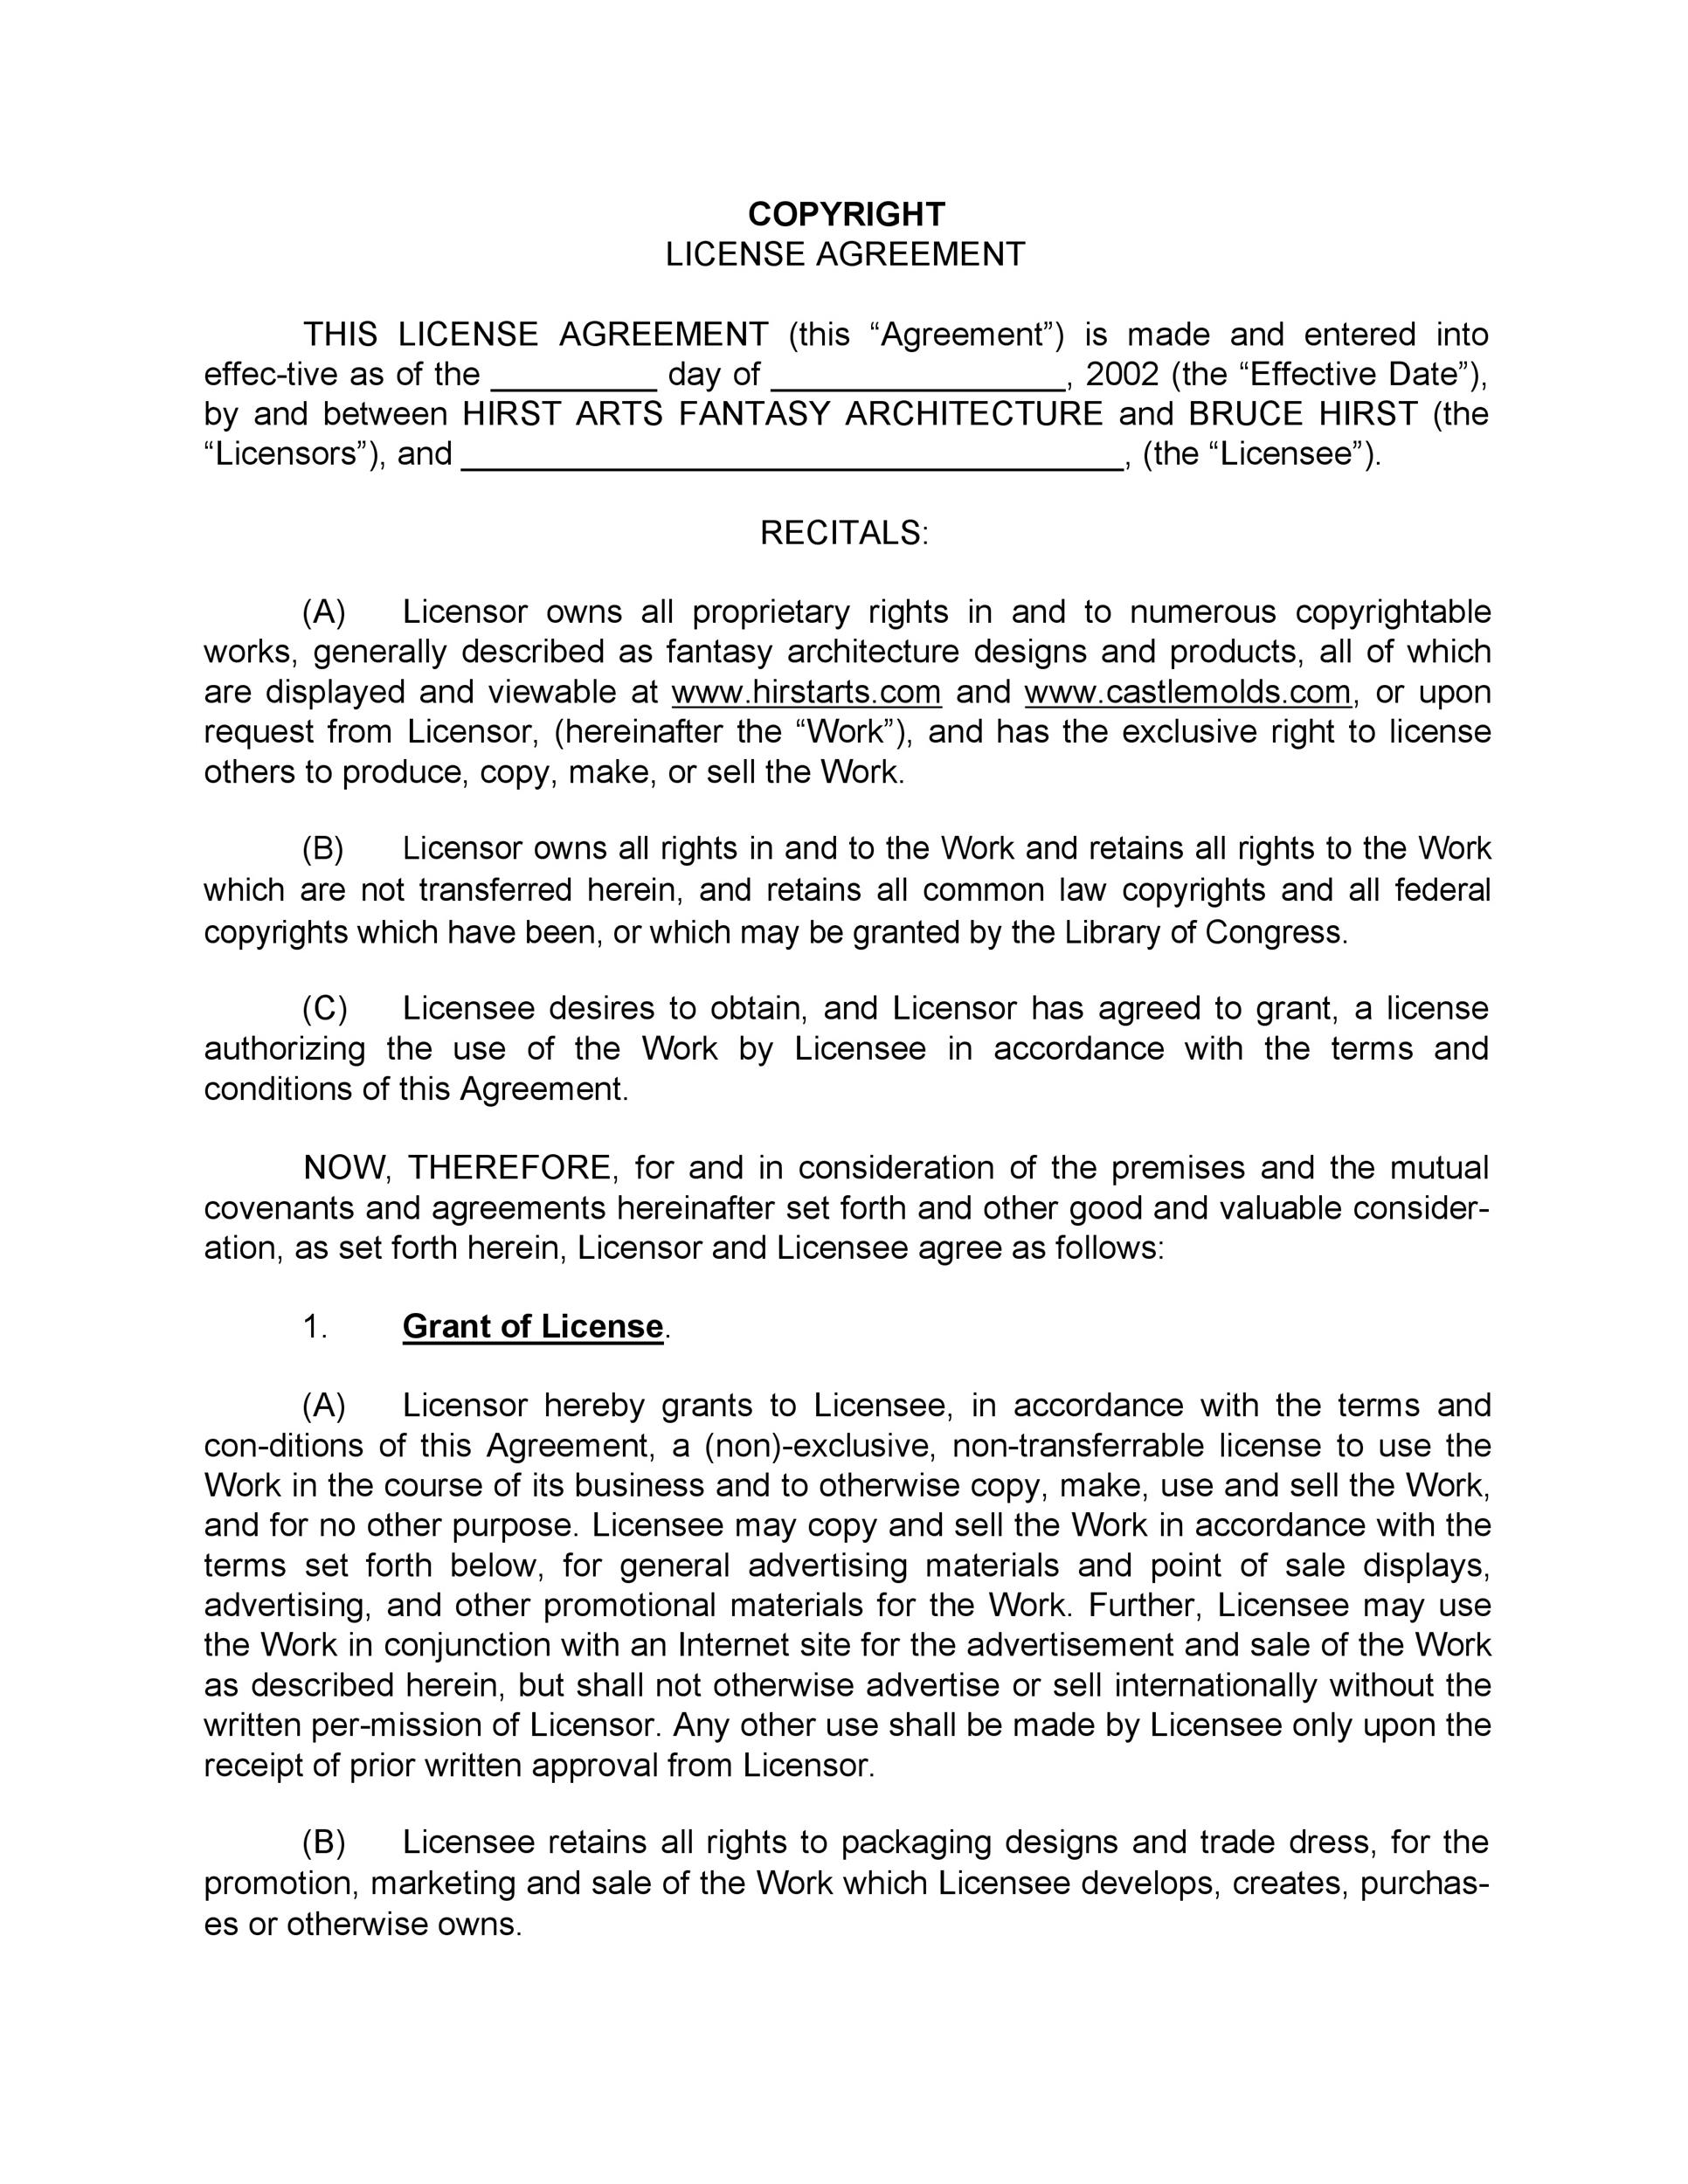 50 Professional License Agreement Templates ᐅ Template Lab